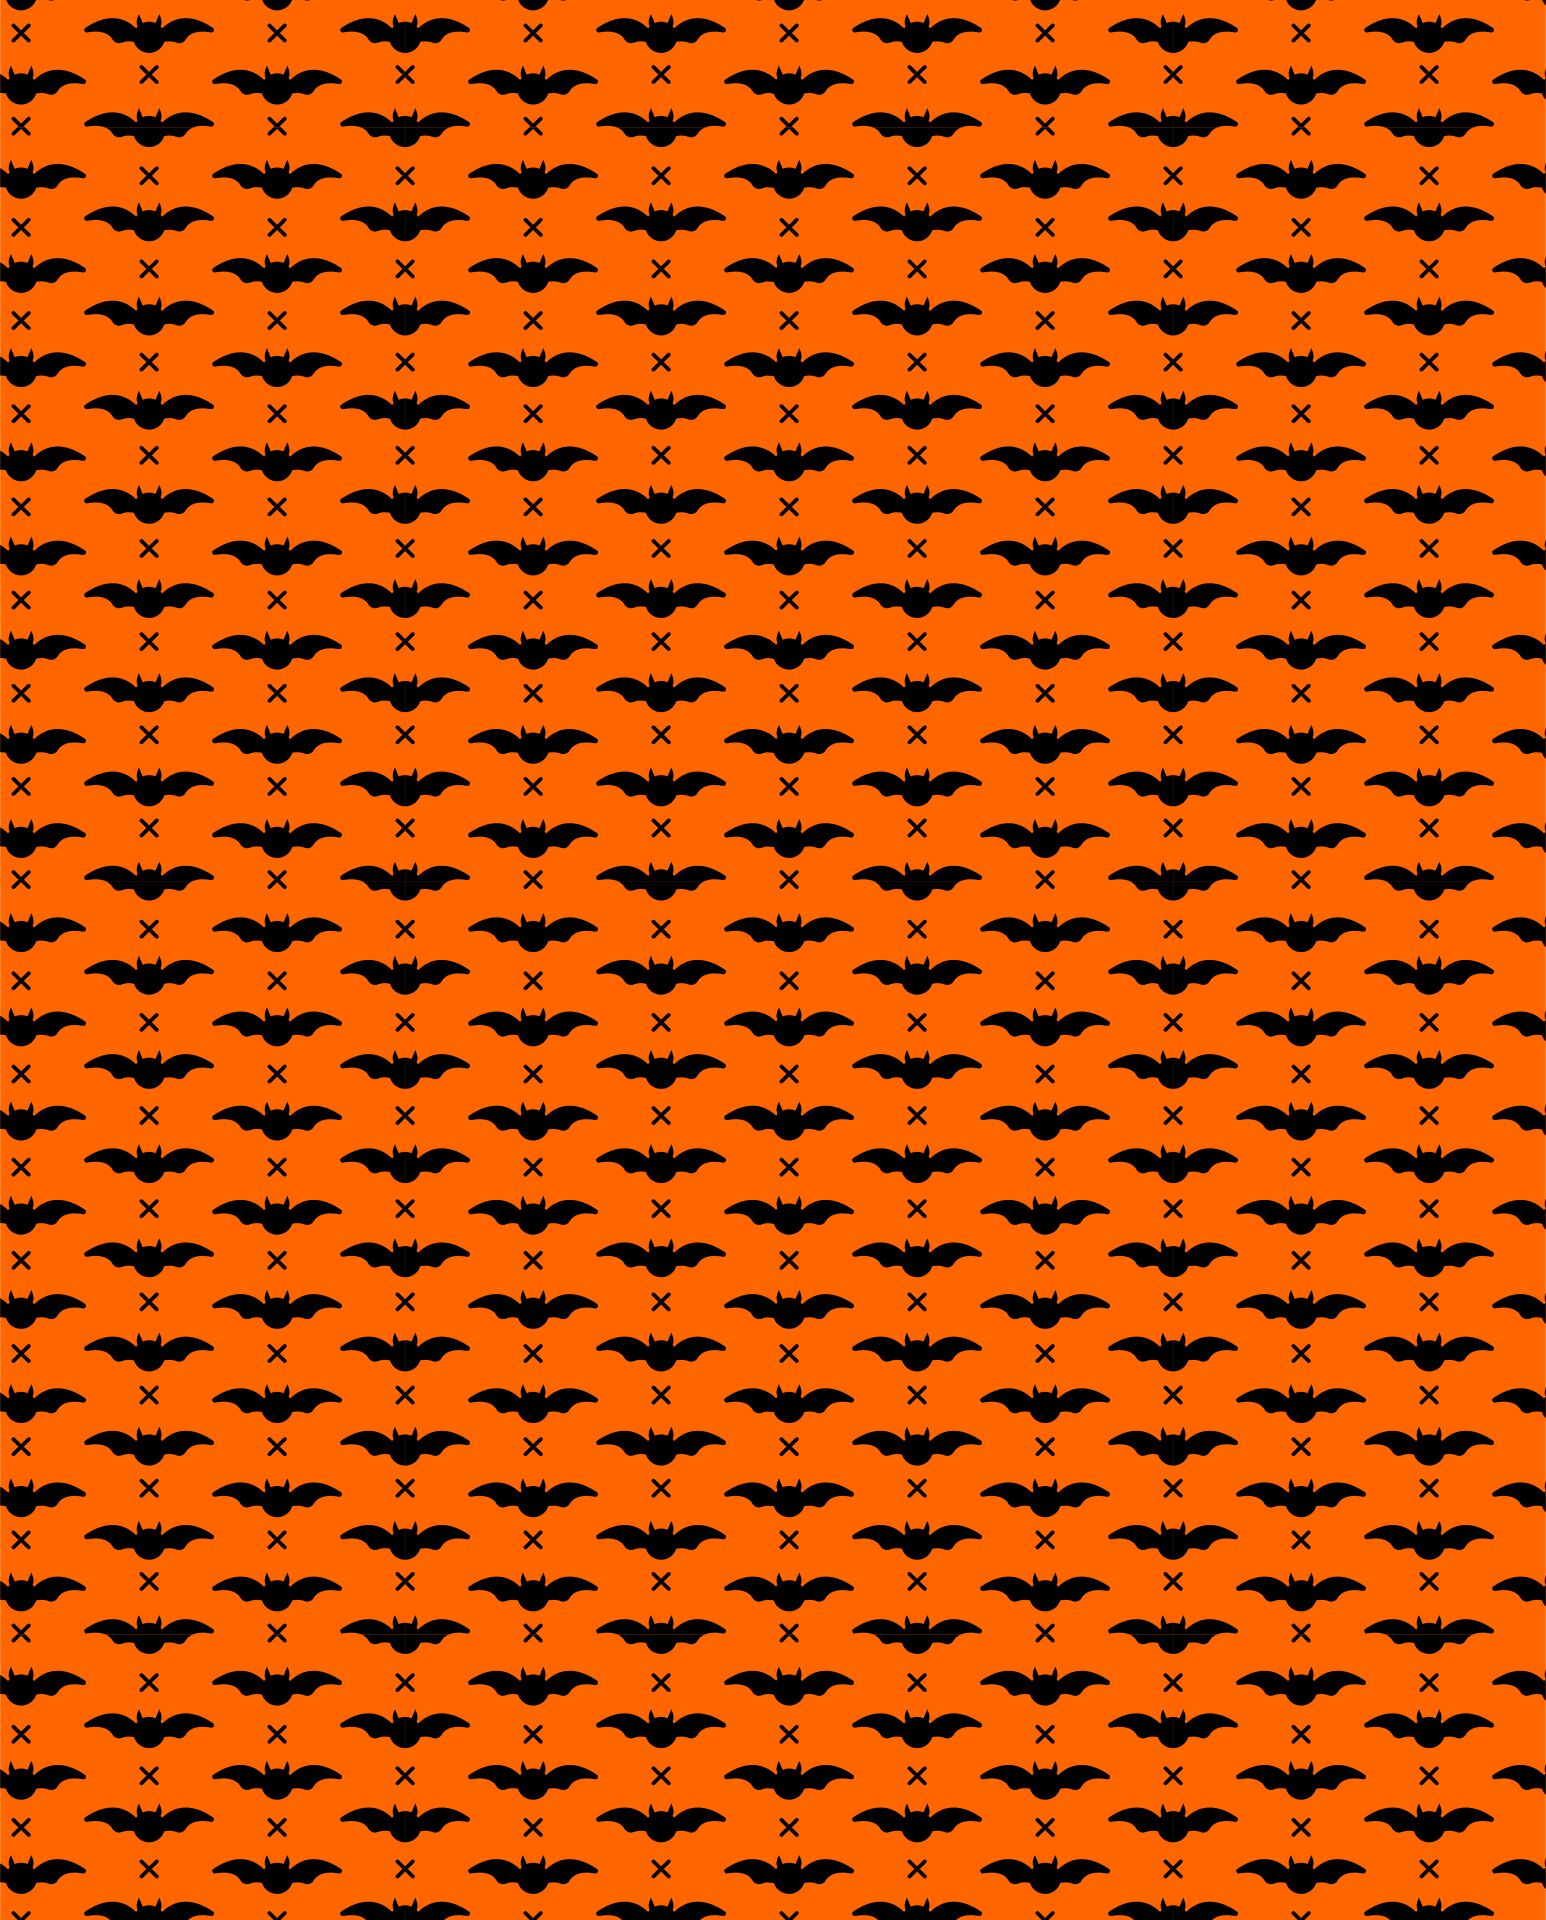 Printable Seamless Halloween Colourful Orange And Black Pattern With Festive